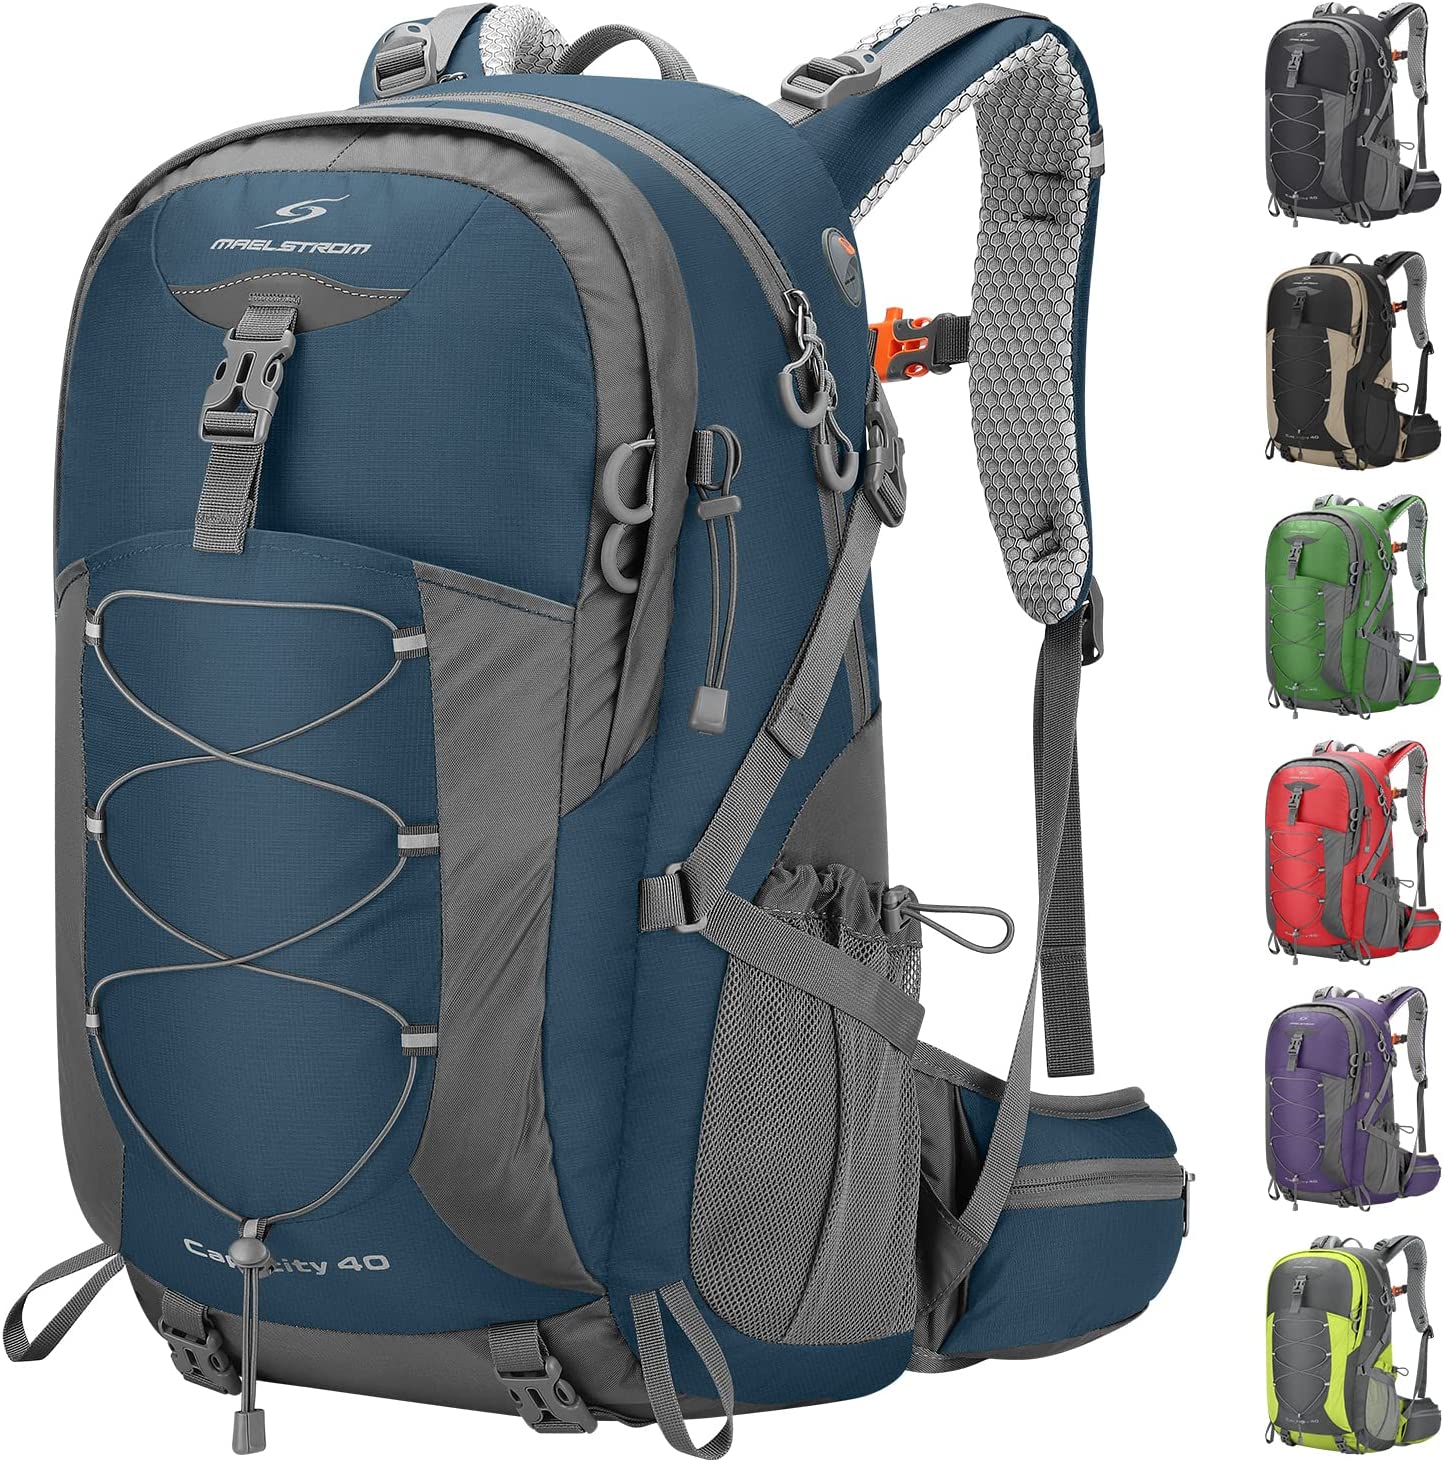 Maelstrom Hiking Backpack Review